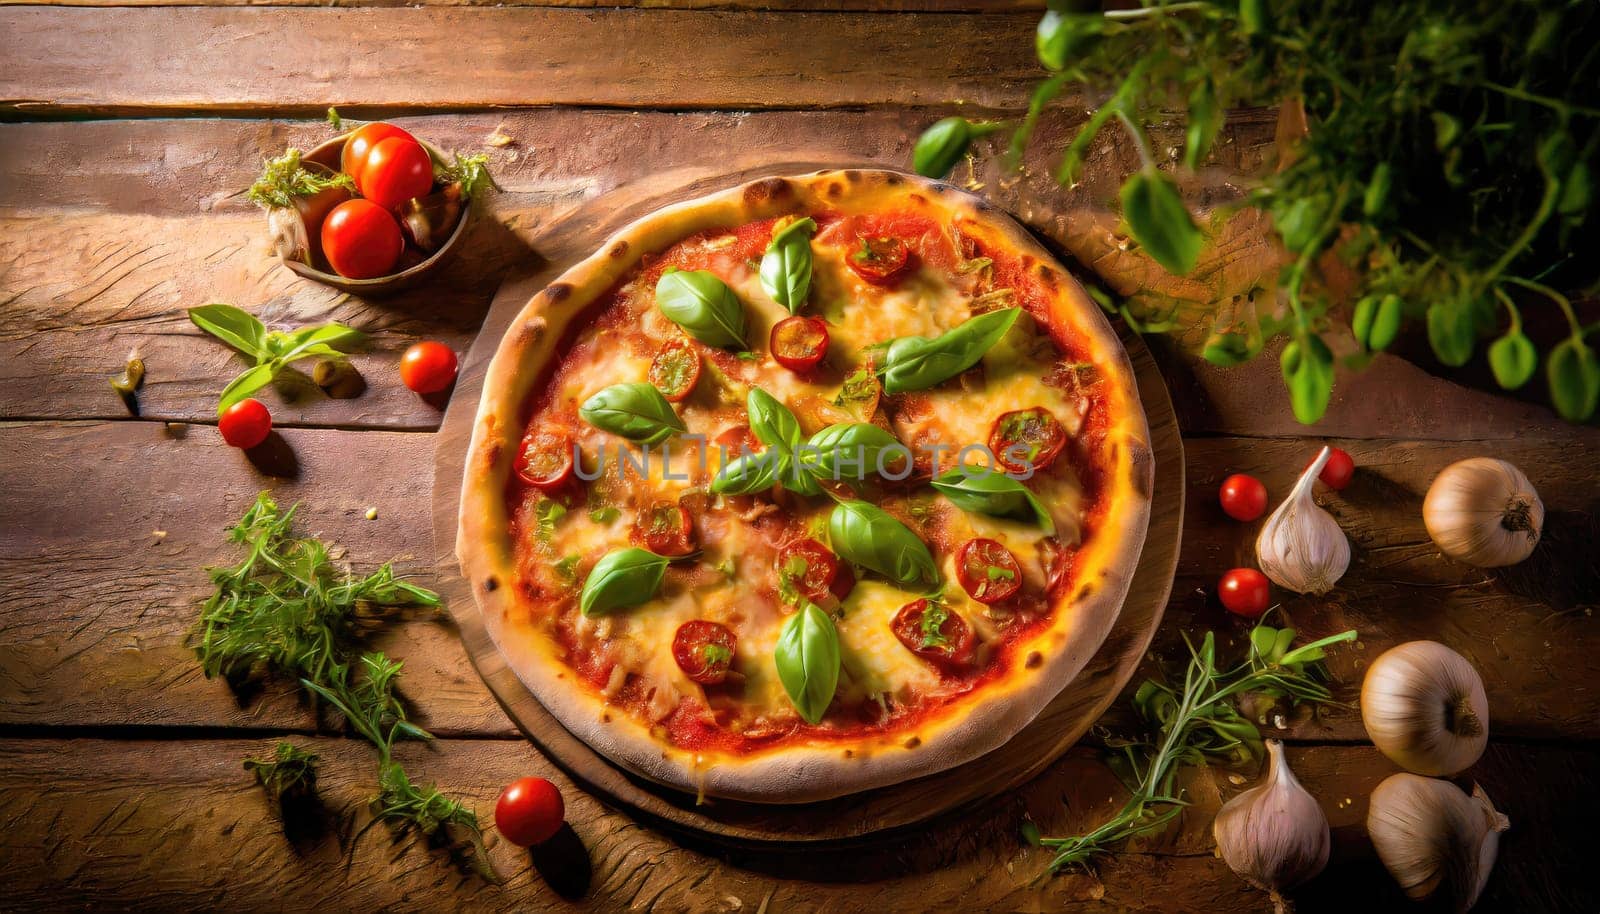 Copy Space image of Pizza Margherita on wooden background, Pizza Margarita